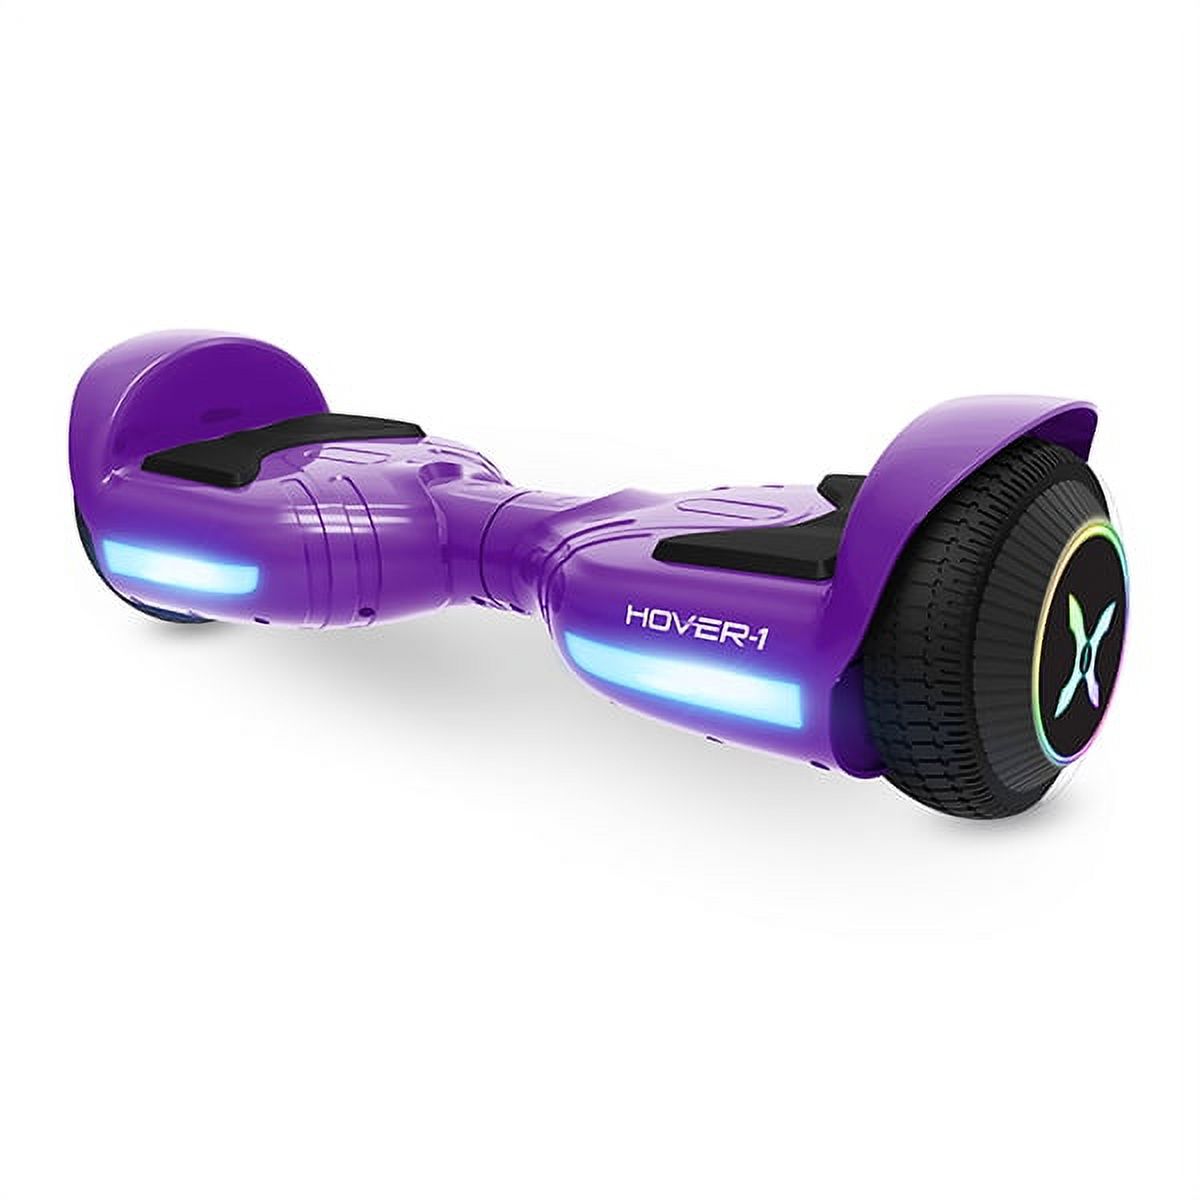 Hover-1 Rocket Hoverboard for Children, 7 MPH Max Speed, Purple - image 1 of 7